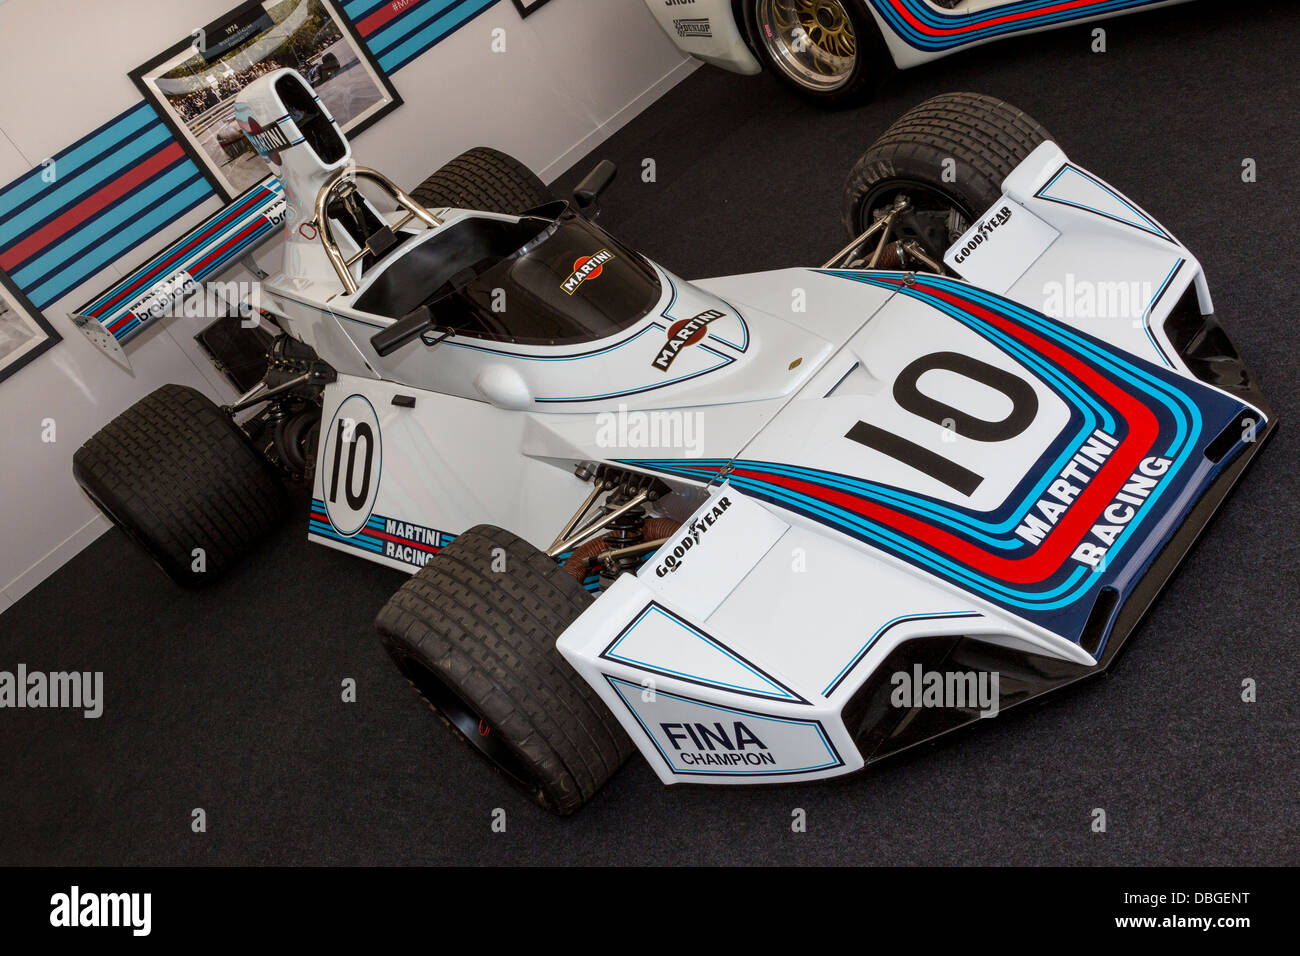 Paddock area at the 2013 Goodwood Festival of Speed, celebrating Martini  Racing. With a Brabham BT45 F1 single seater Stock Photo - Alamy